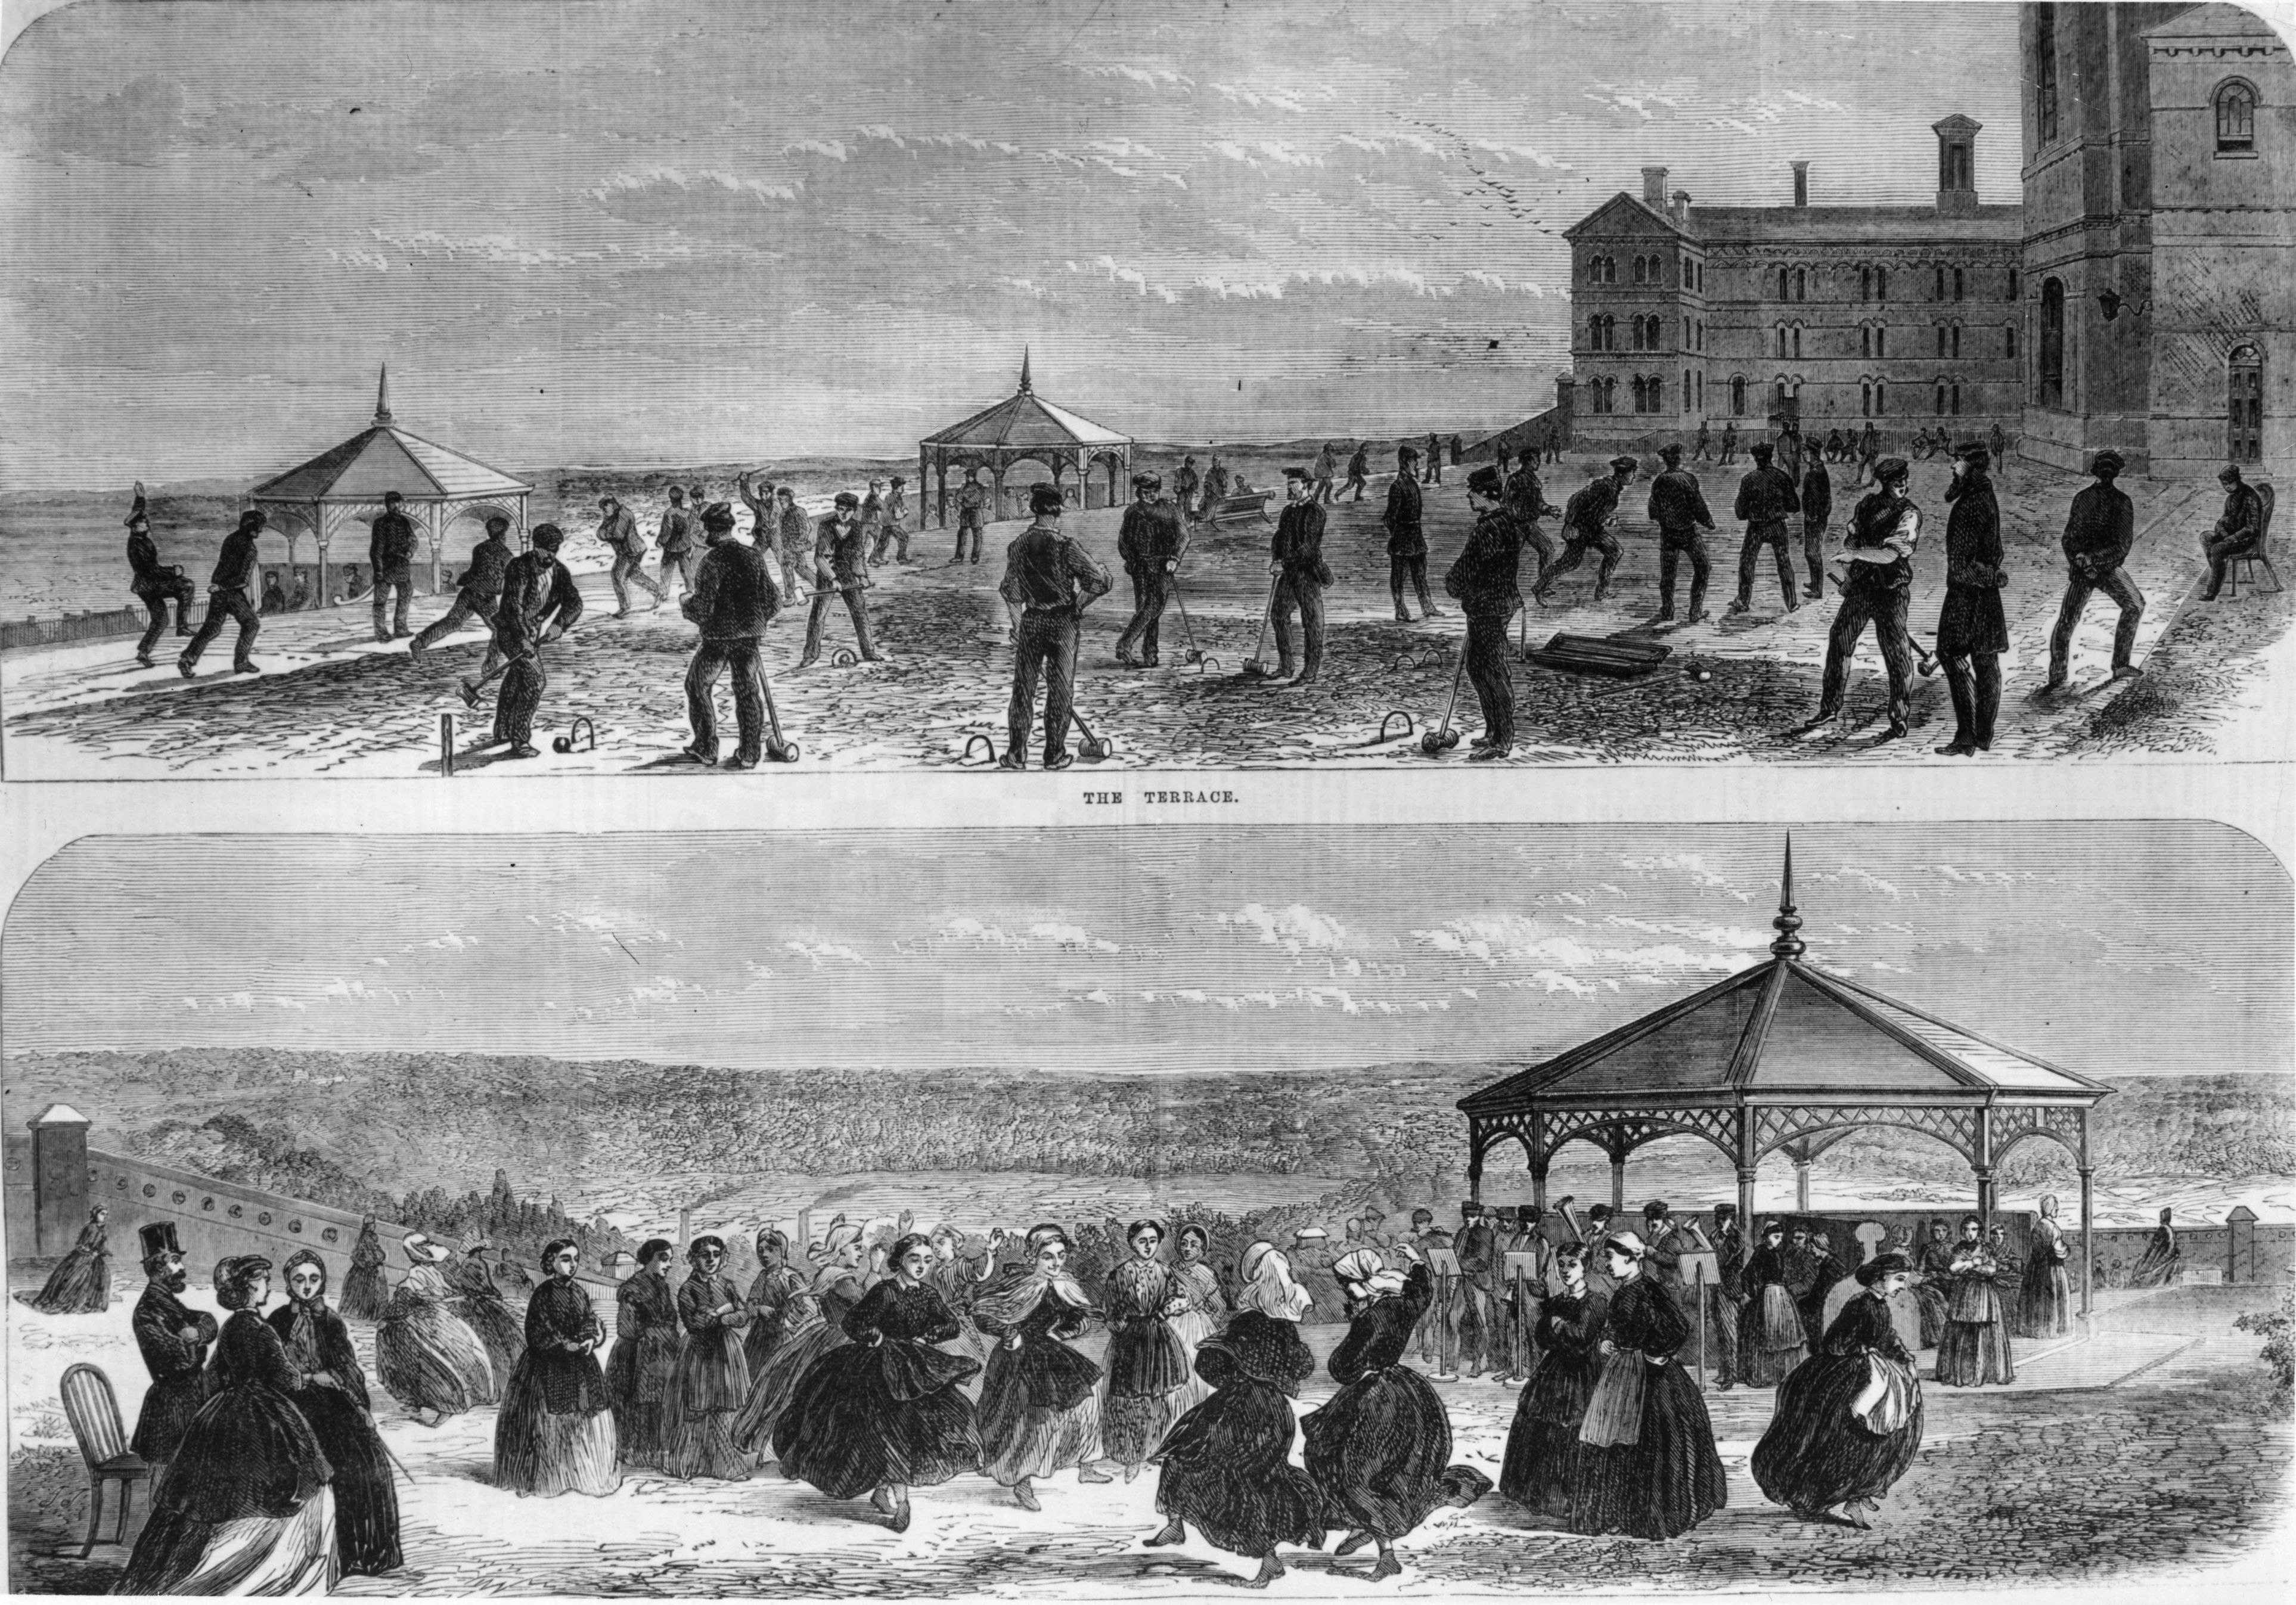 An historic print showing patients outside Broadmoor in the 1860s